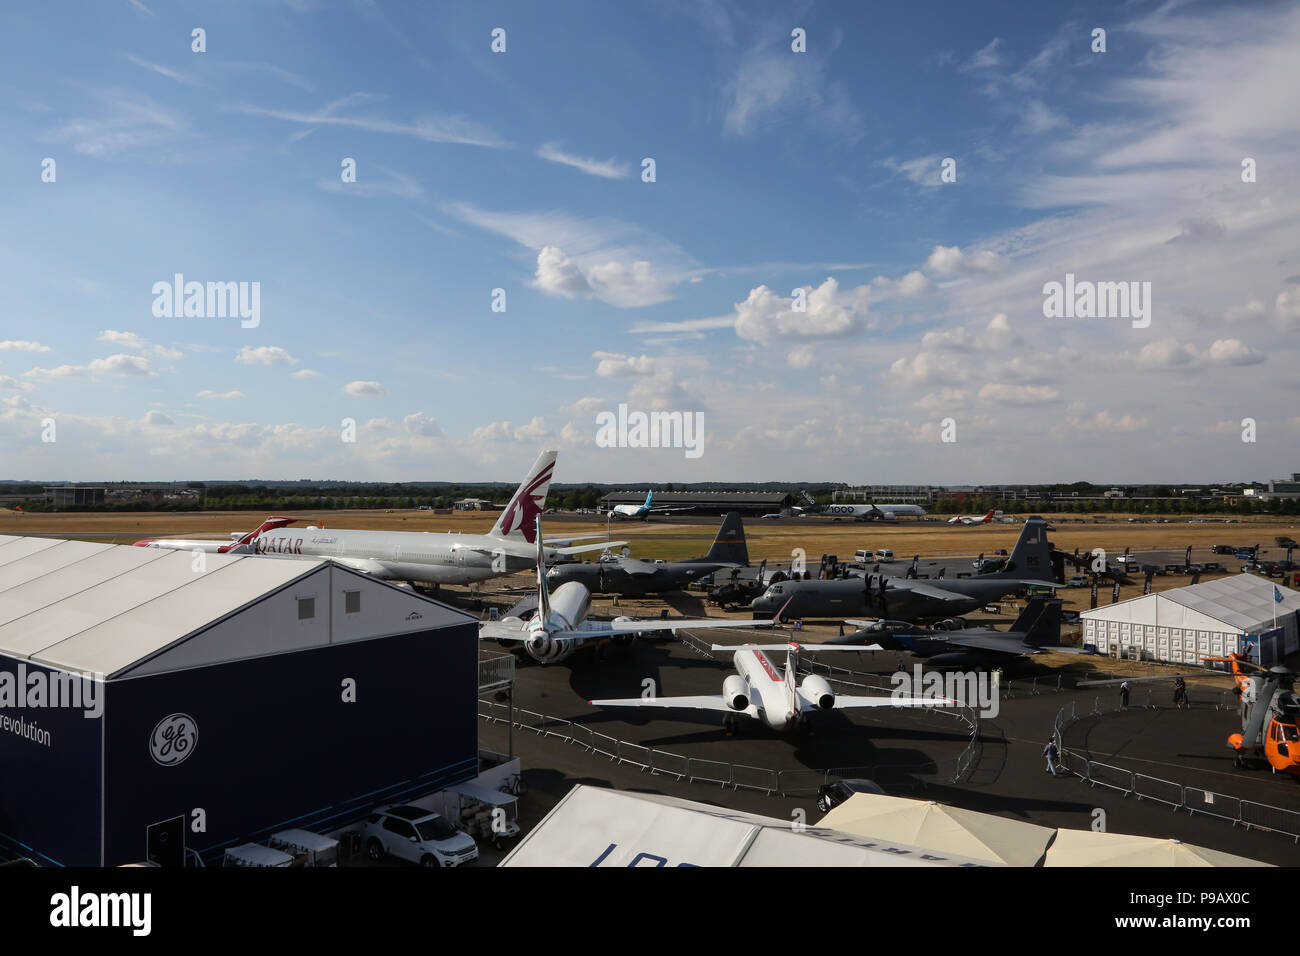 Farnborough, UK. 16th July 2018. A general view of aircraft from Boeing, Airbus, and Lockheed Martin which are parked at the end of the opening day of the 2018 Farnborough International Airshow, one of the biggest aviation trade and industry events in the world, held in the UK. Credit: James Hancock/Alamy Live News Stock Photo